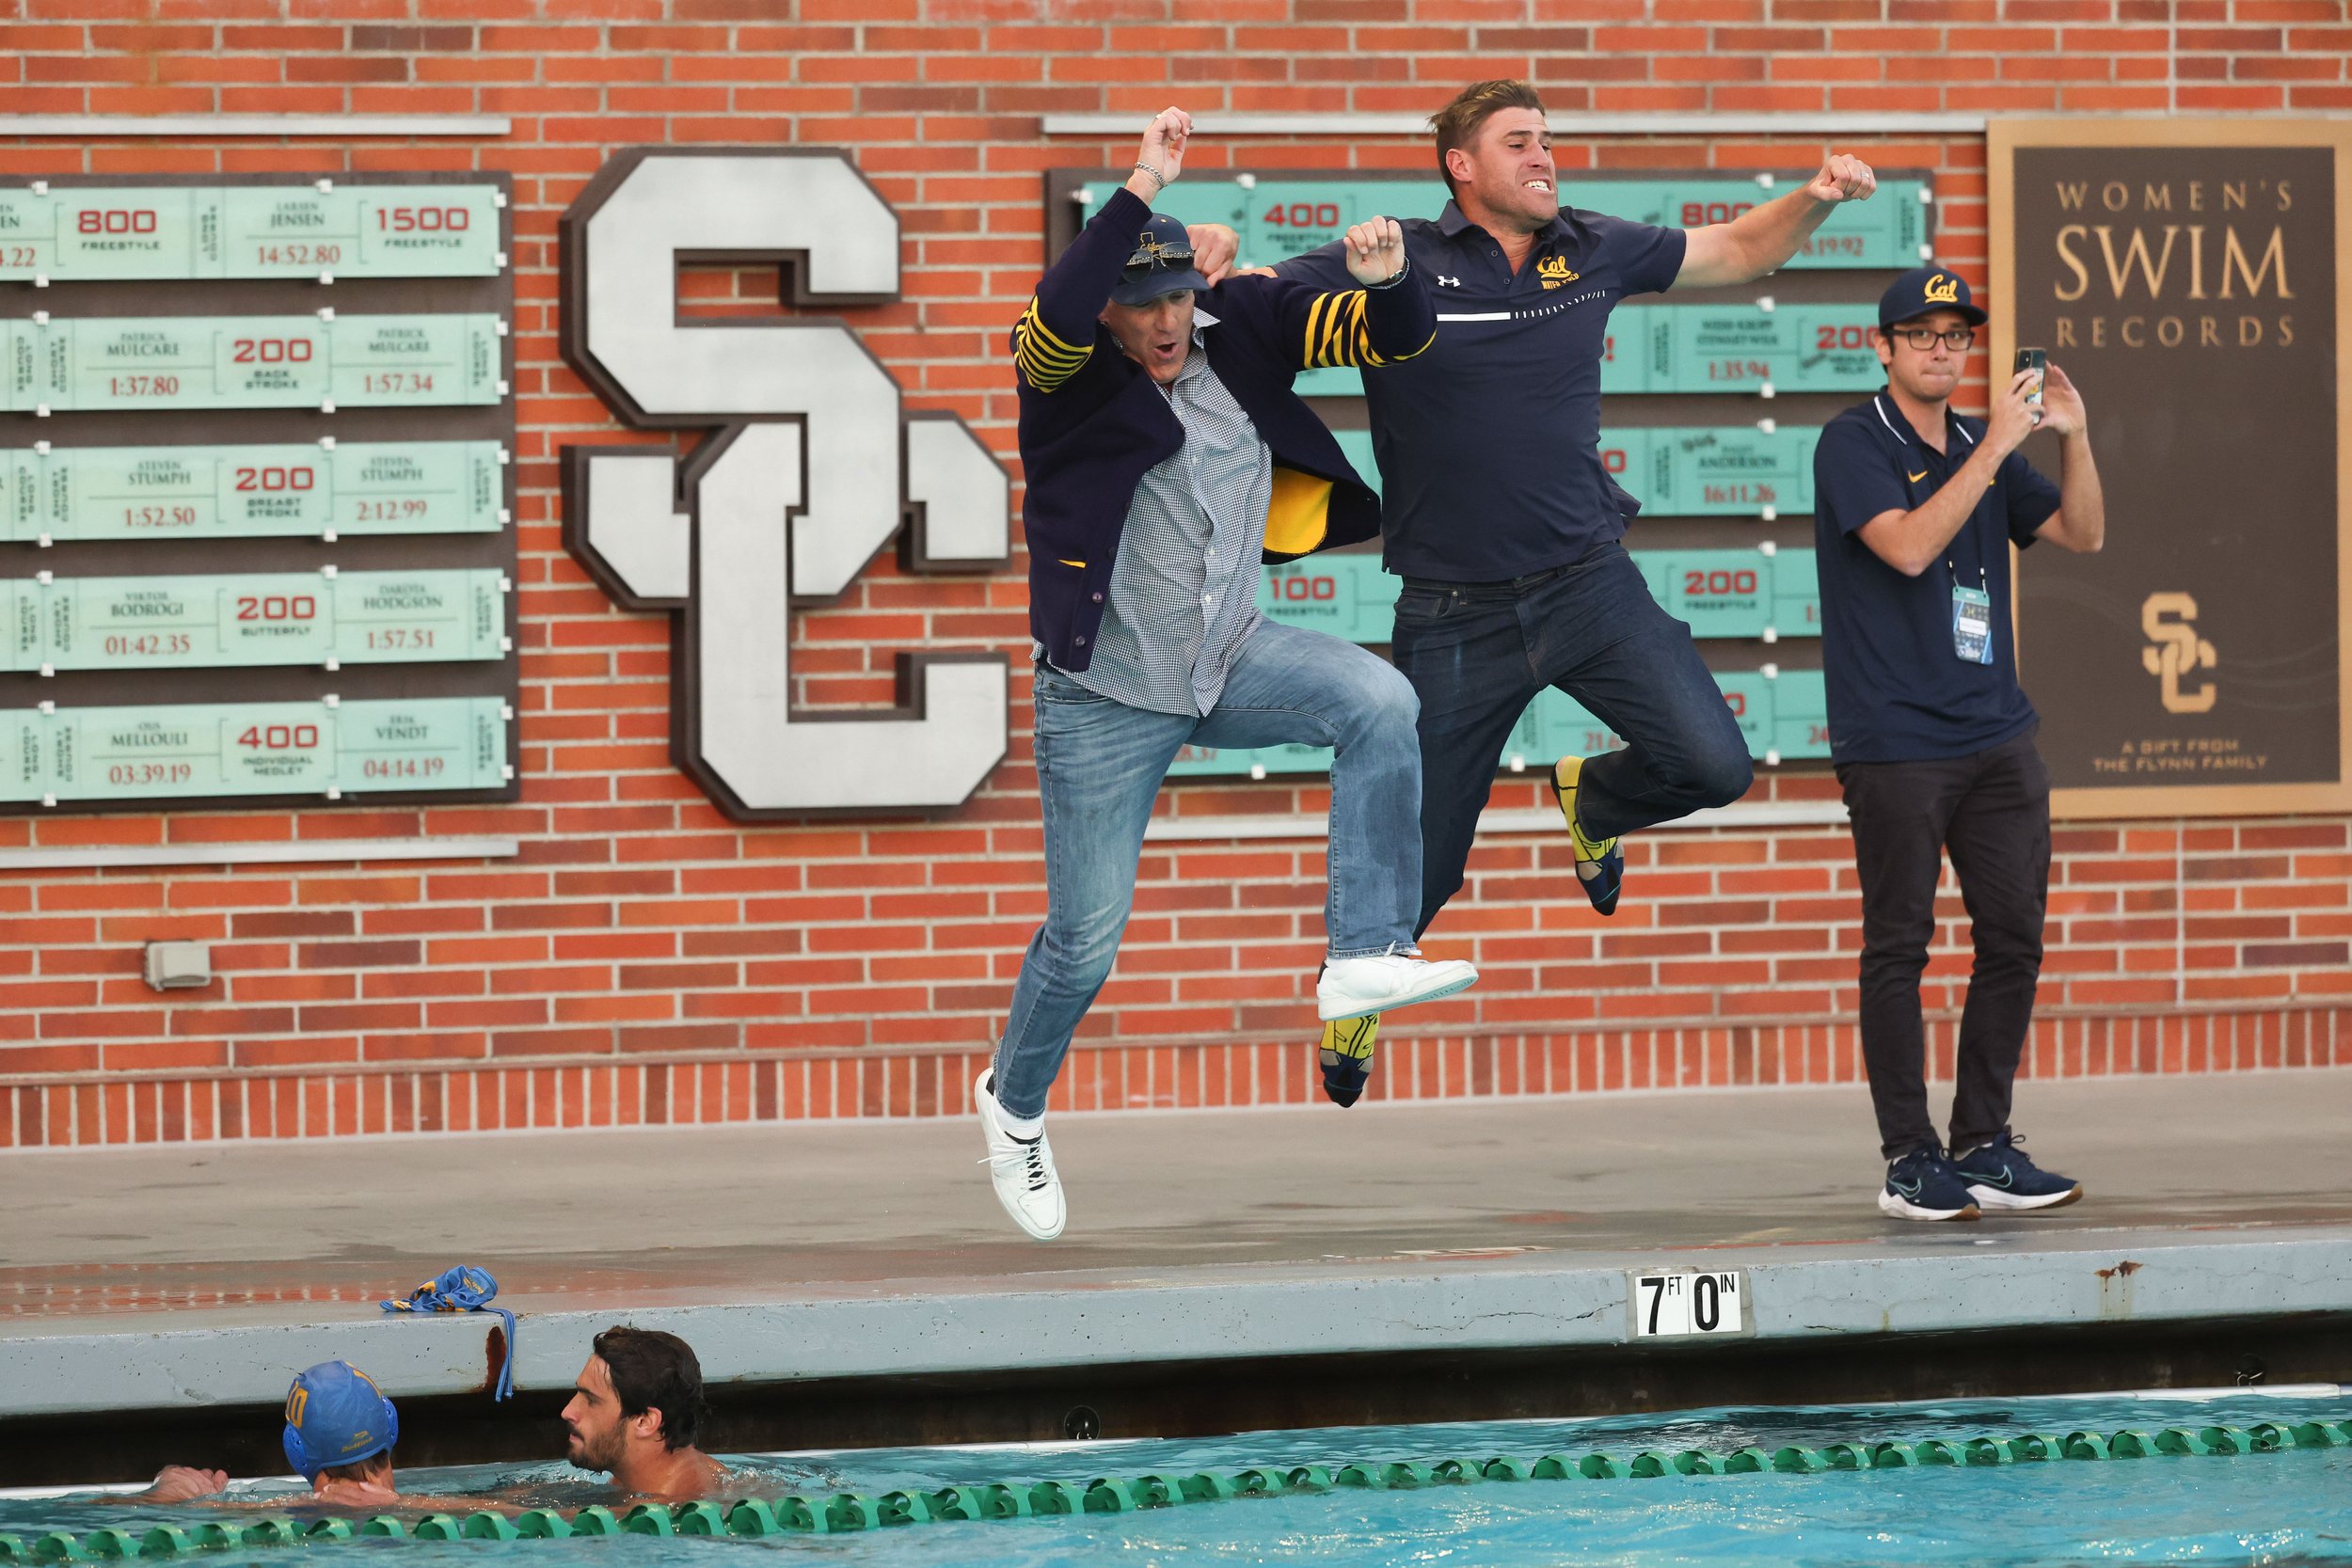  LOS ANGELES, CALIFORNIA - DECEMBER 3: Head coach Kirk Everist and associate head coach Jason Falitz of the California Golden Bears celebrate after winning the National Collegiate Men's Water Polo Championship game against the UCLA Bruins held at Uyt